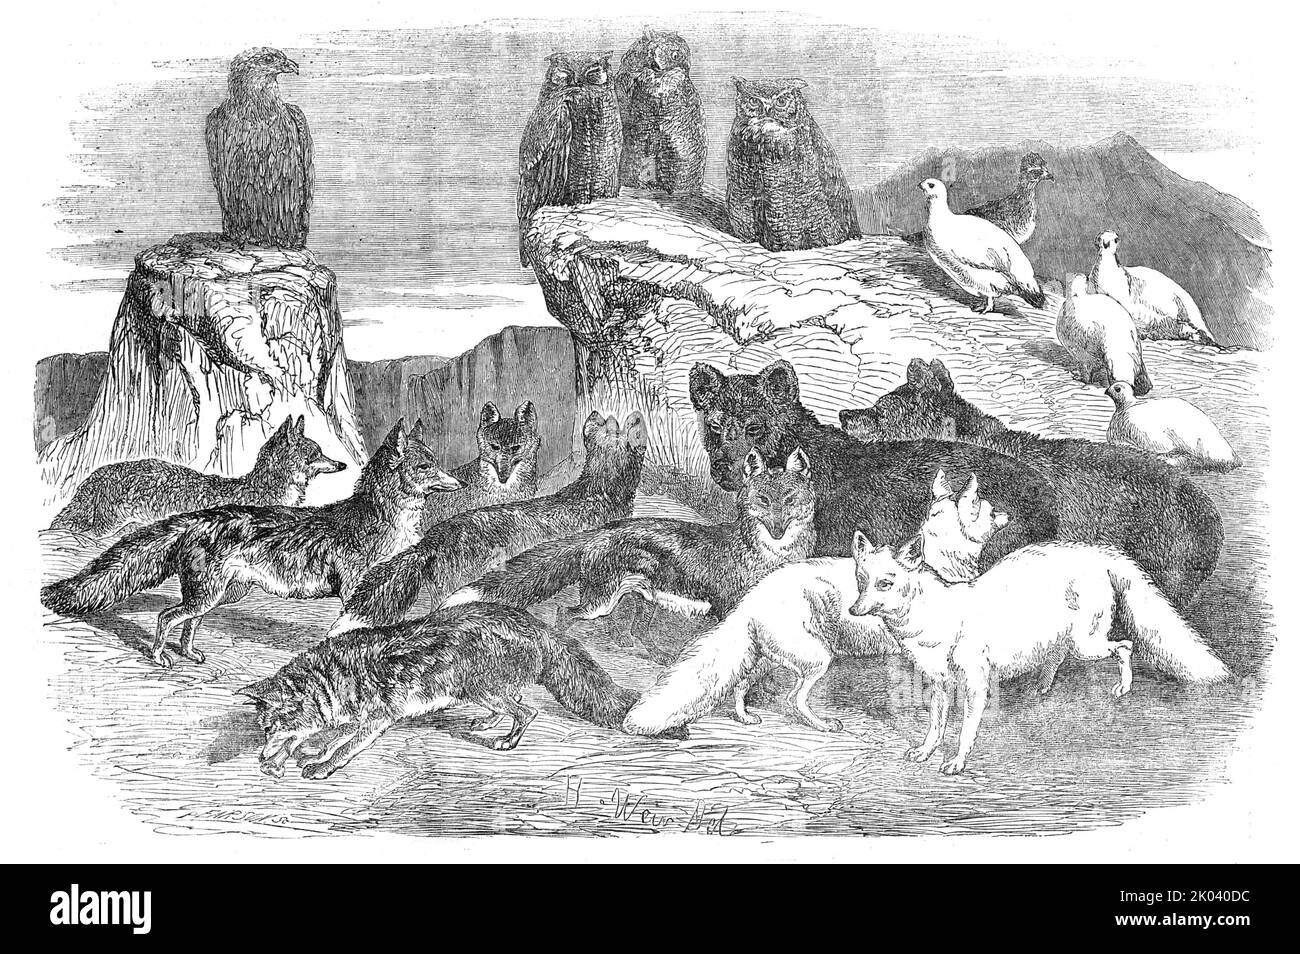 Arctic Foxes and Birds, just received by the Zoological Society, 1854. New animals at London Zoo. 'A considerable number of valuable Arctic birds, foxes, &amp;c., has just been received by the Zoological Society from the territories of the Hudson's Bay Company [in Canada]...The birds consist of three fine specimens of the American Eagle Owl, five rare white Arctic Grouse, one Ruffed Grouse, and a young White-headed Eagle. The varieties of the foxes are the White Arctic, the Red, and the Silver; one specimen of the latter has recently died. Besides ten Foxes, there are two young Black Bears. Th Stock Photo